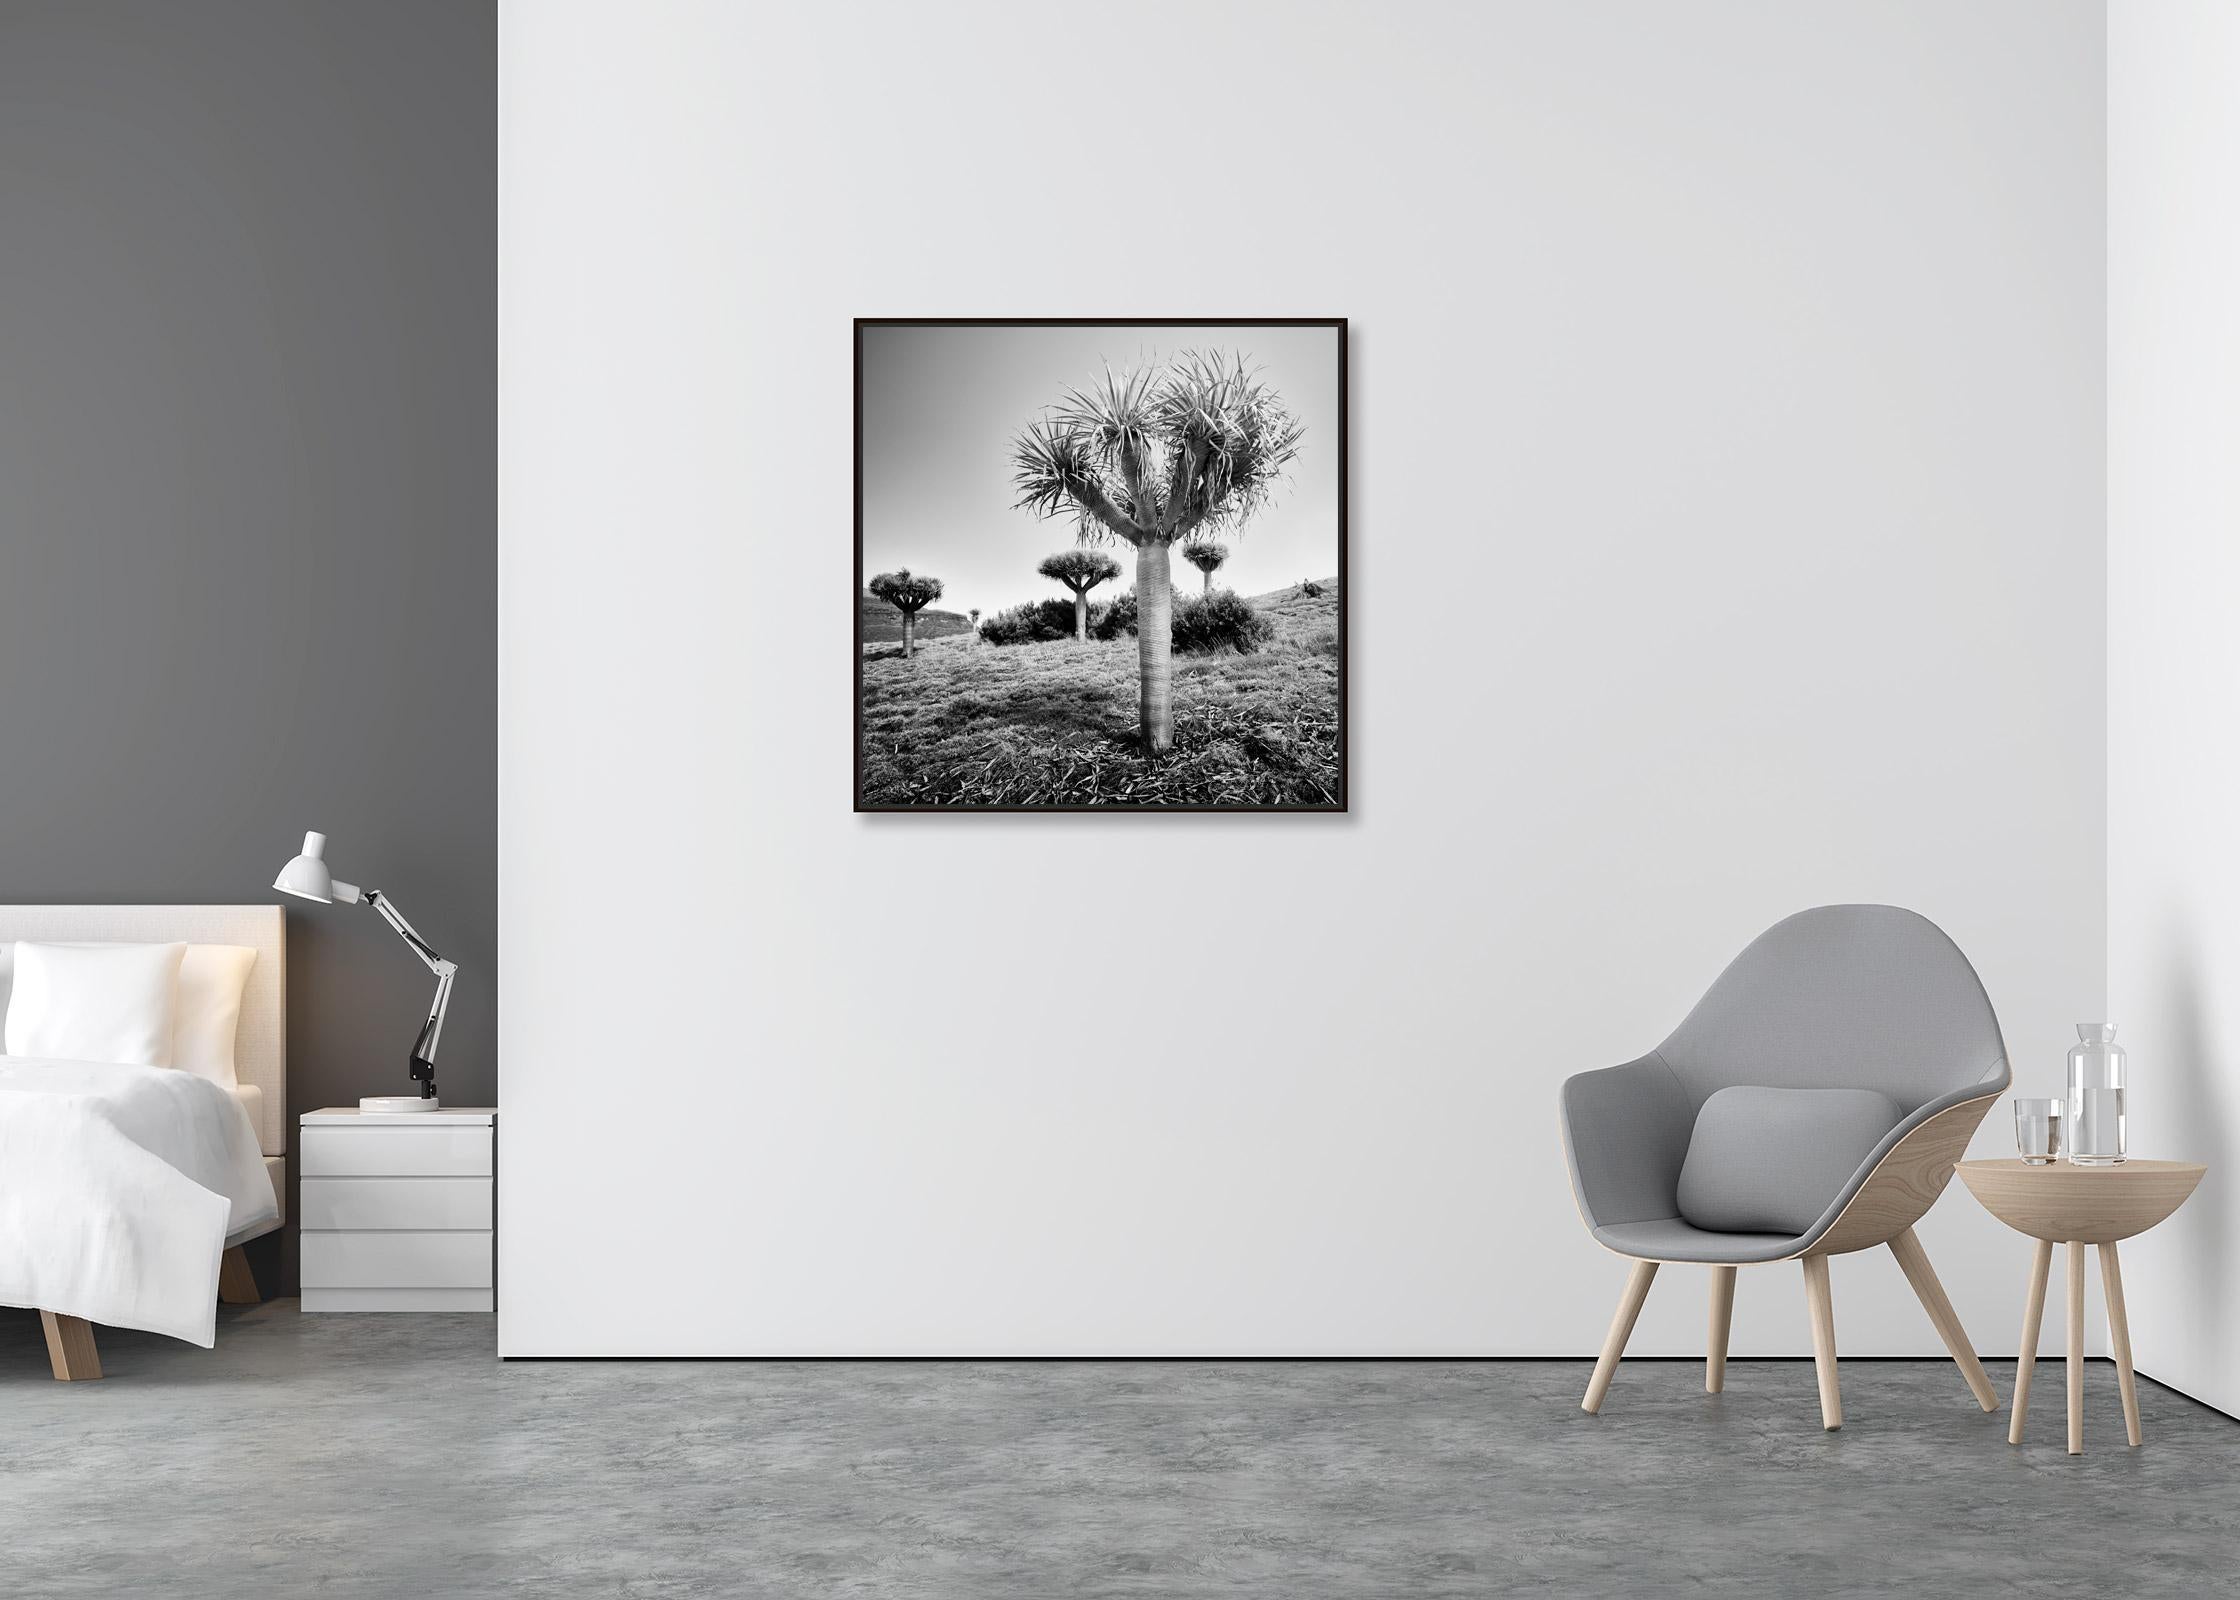 Canary Islands Dragon Tree, Madeira, black white fine art Landscape photography - Contemporary Photograph by Gerald Berghammer